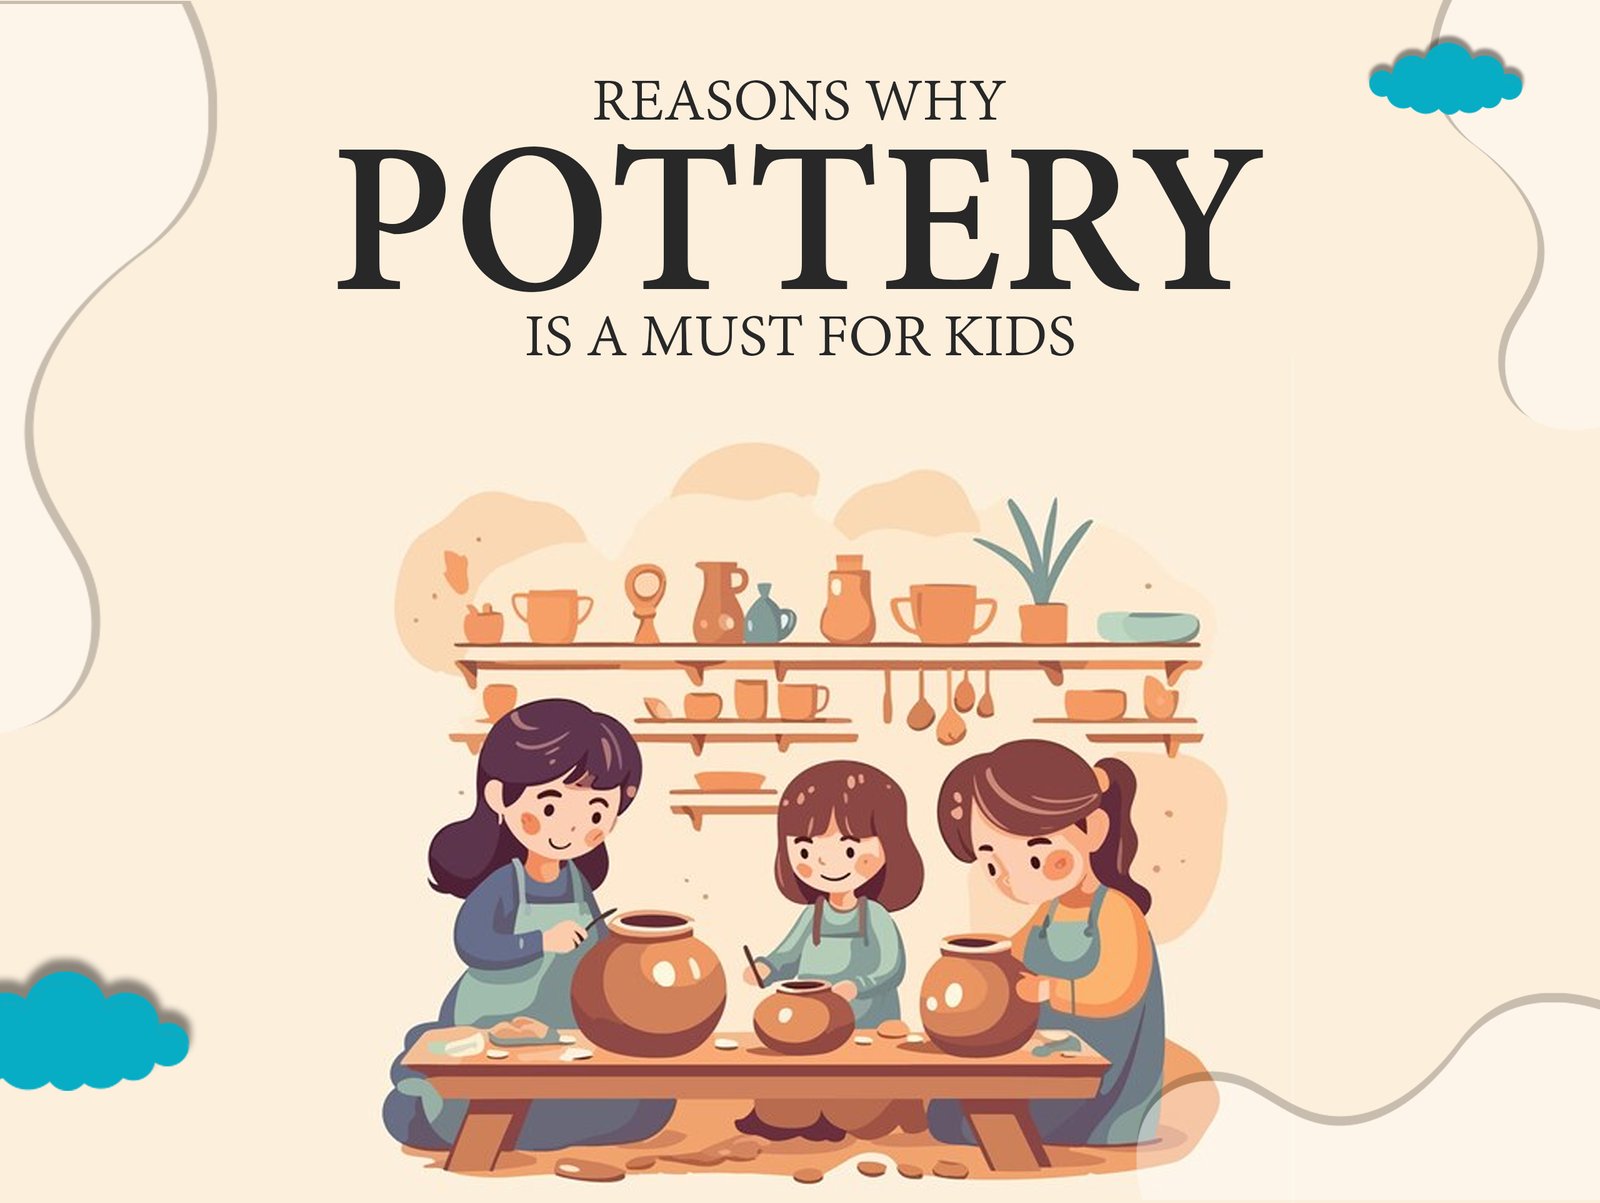 Reason why pottery is a must for kids poster